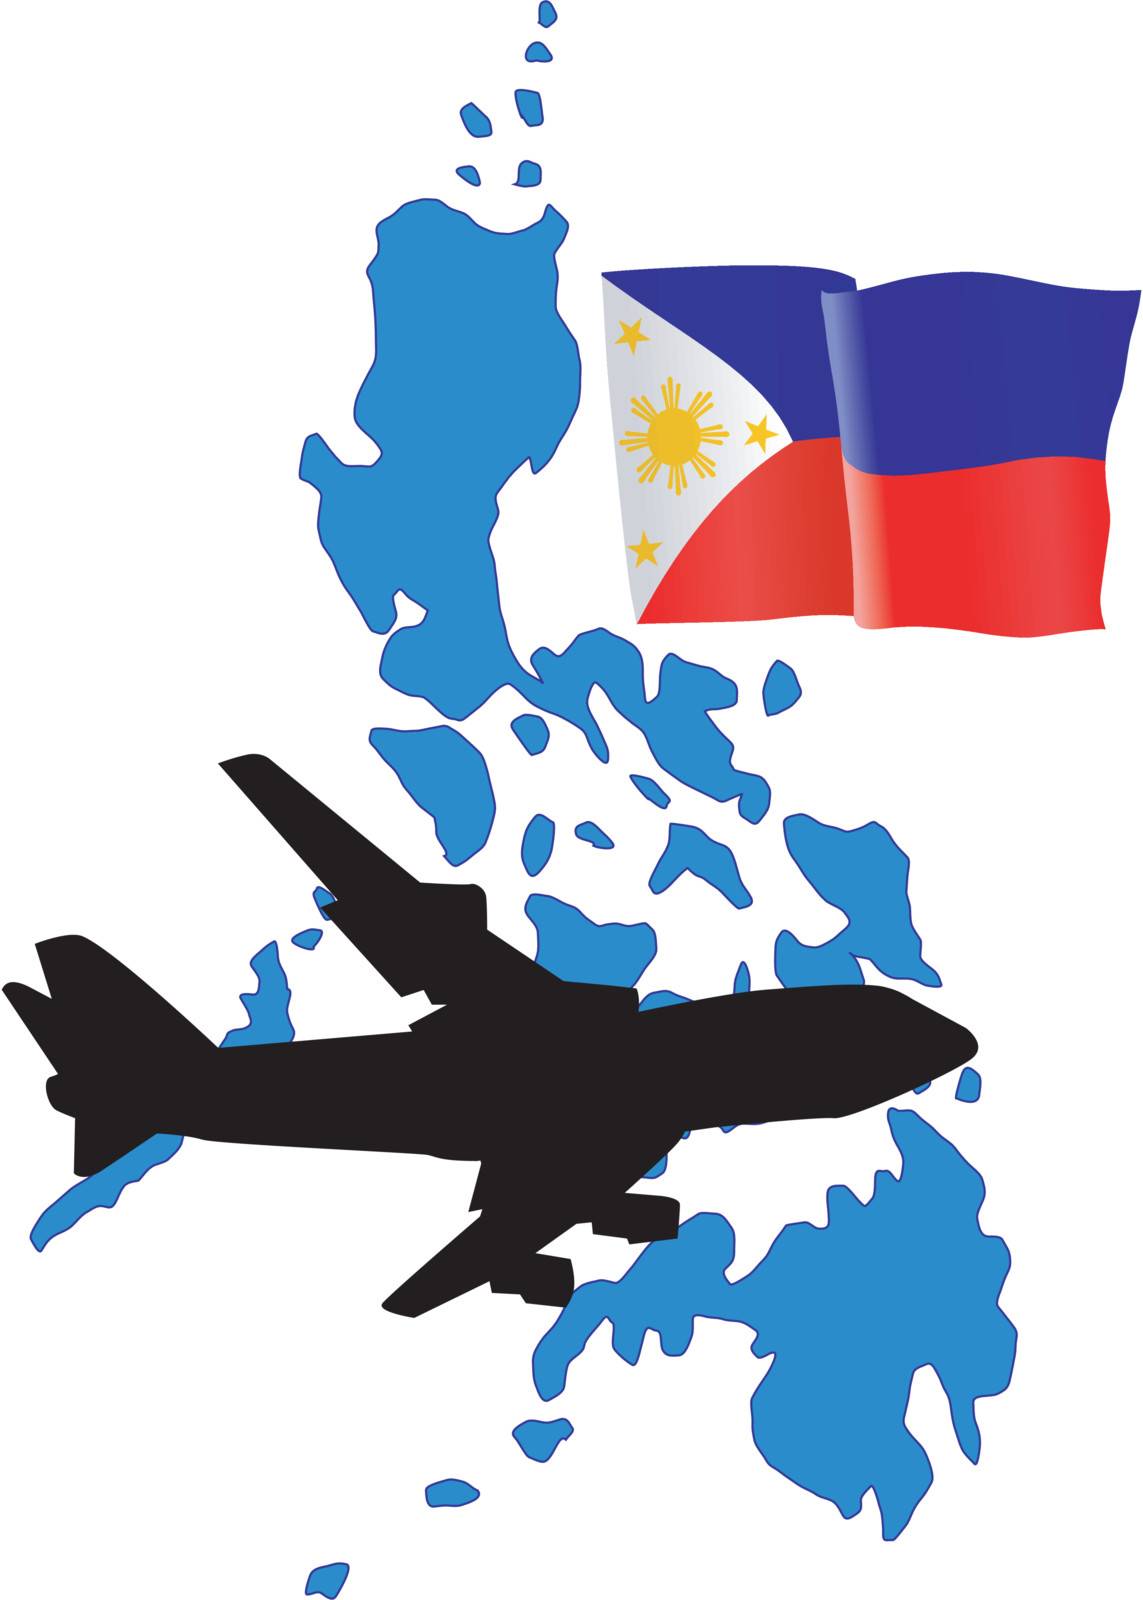 fly me to the Philippines by Perysty